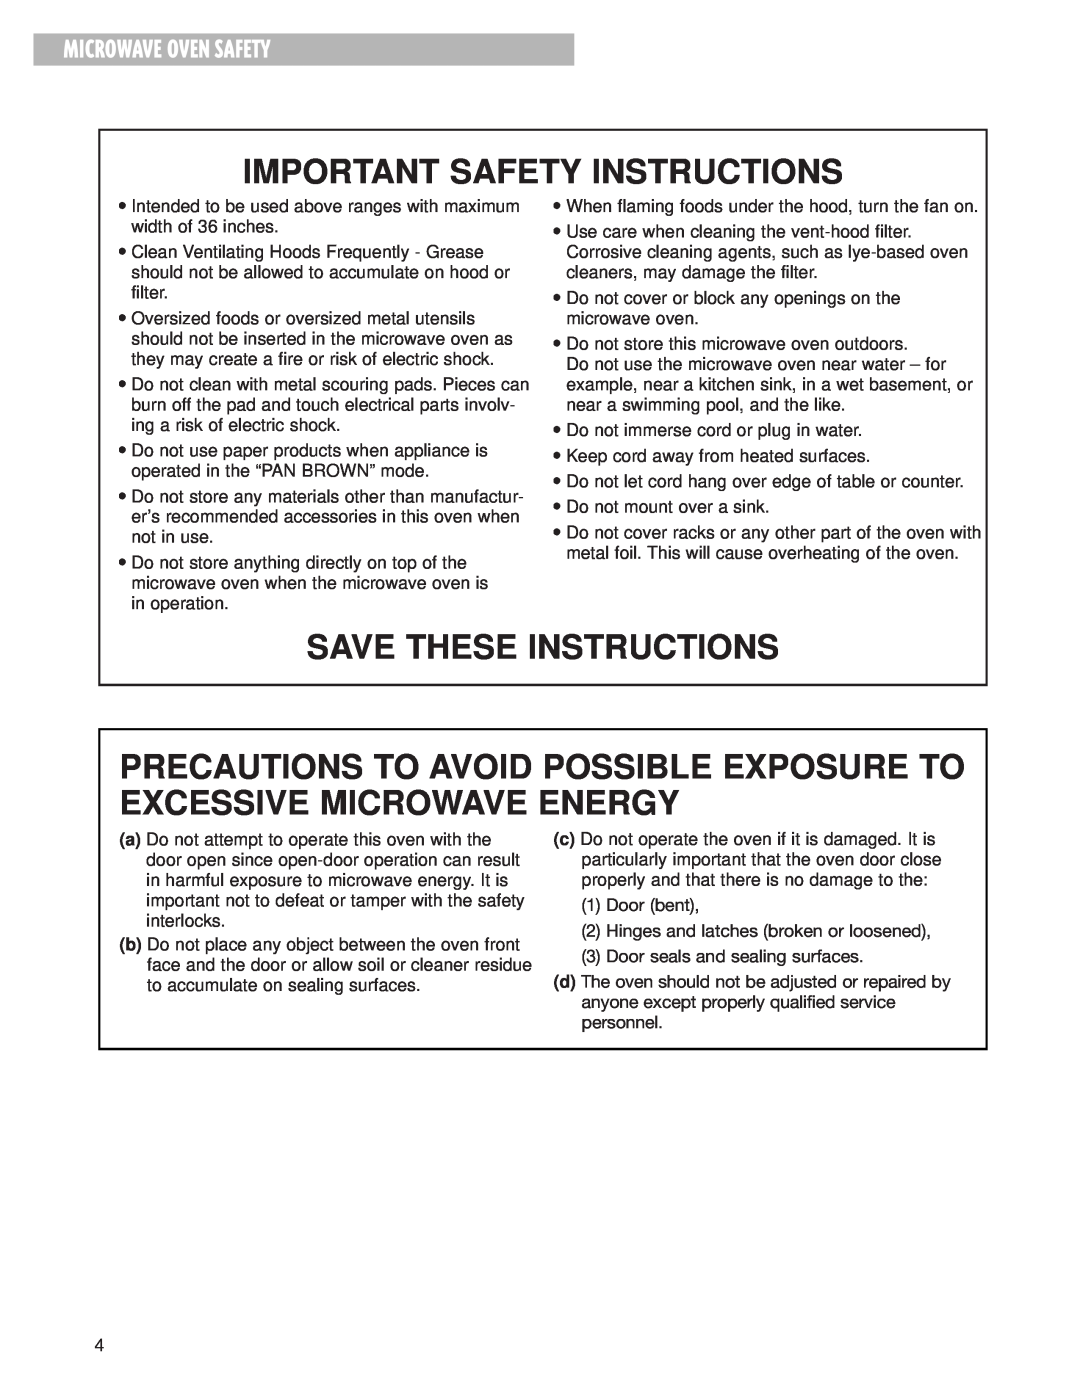 Whirlpool MH8150XJ Precautions To Avoid Possible Exposure To Excessive Microwave Energy, Microwave Oven Safety 